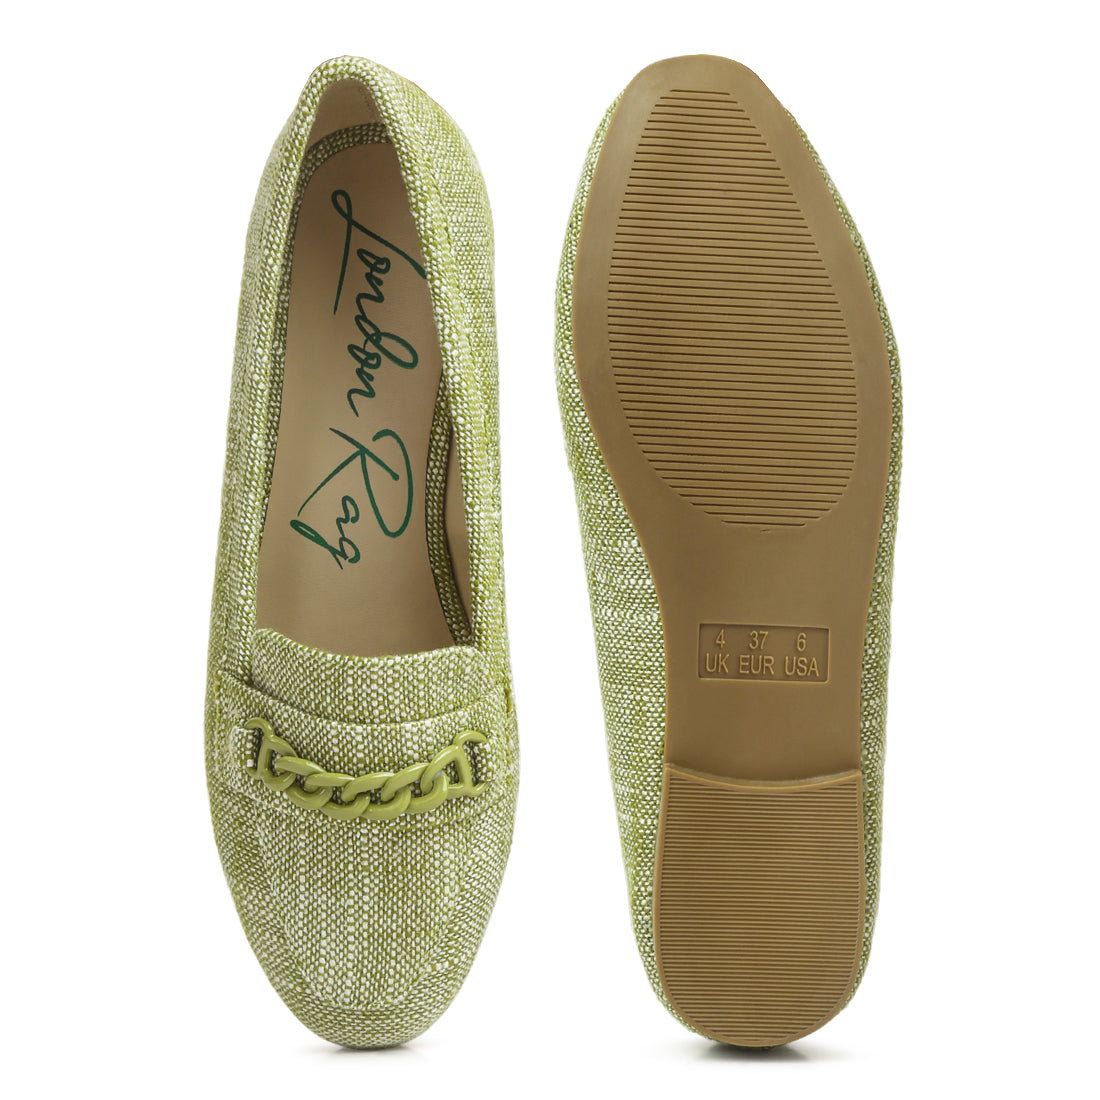 chain embellished loafers#color_green